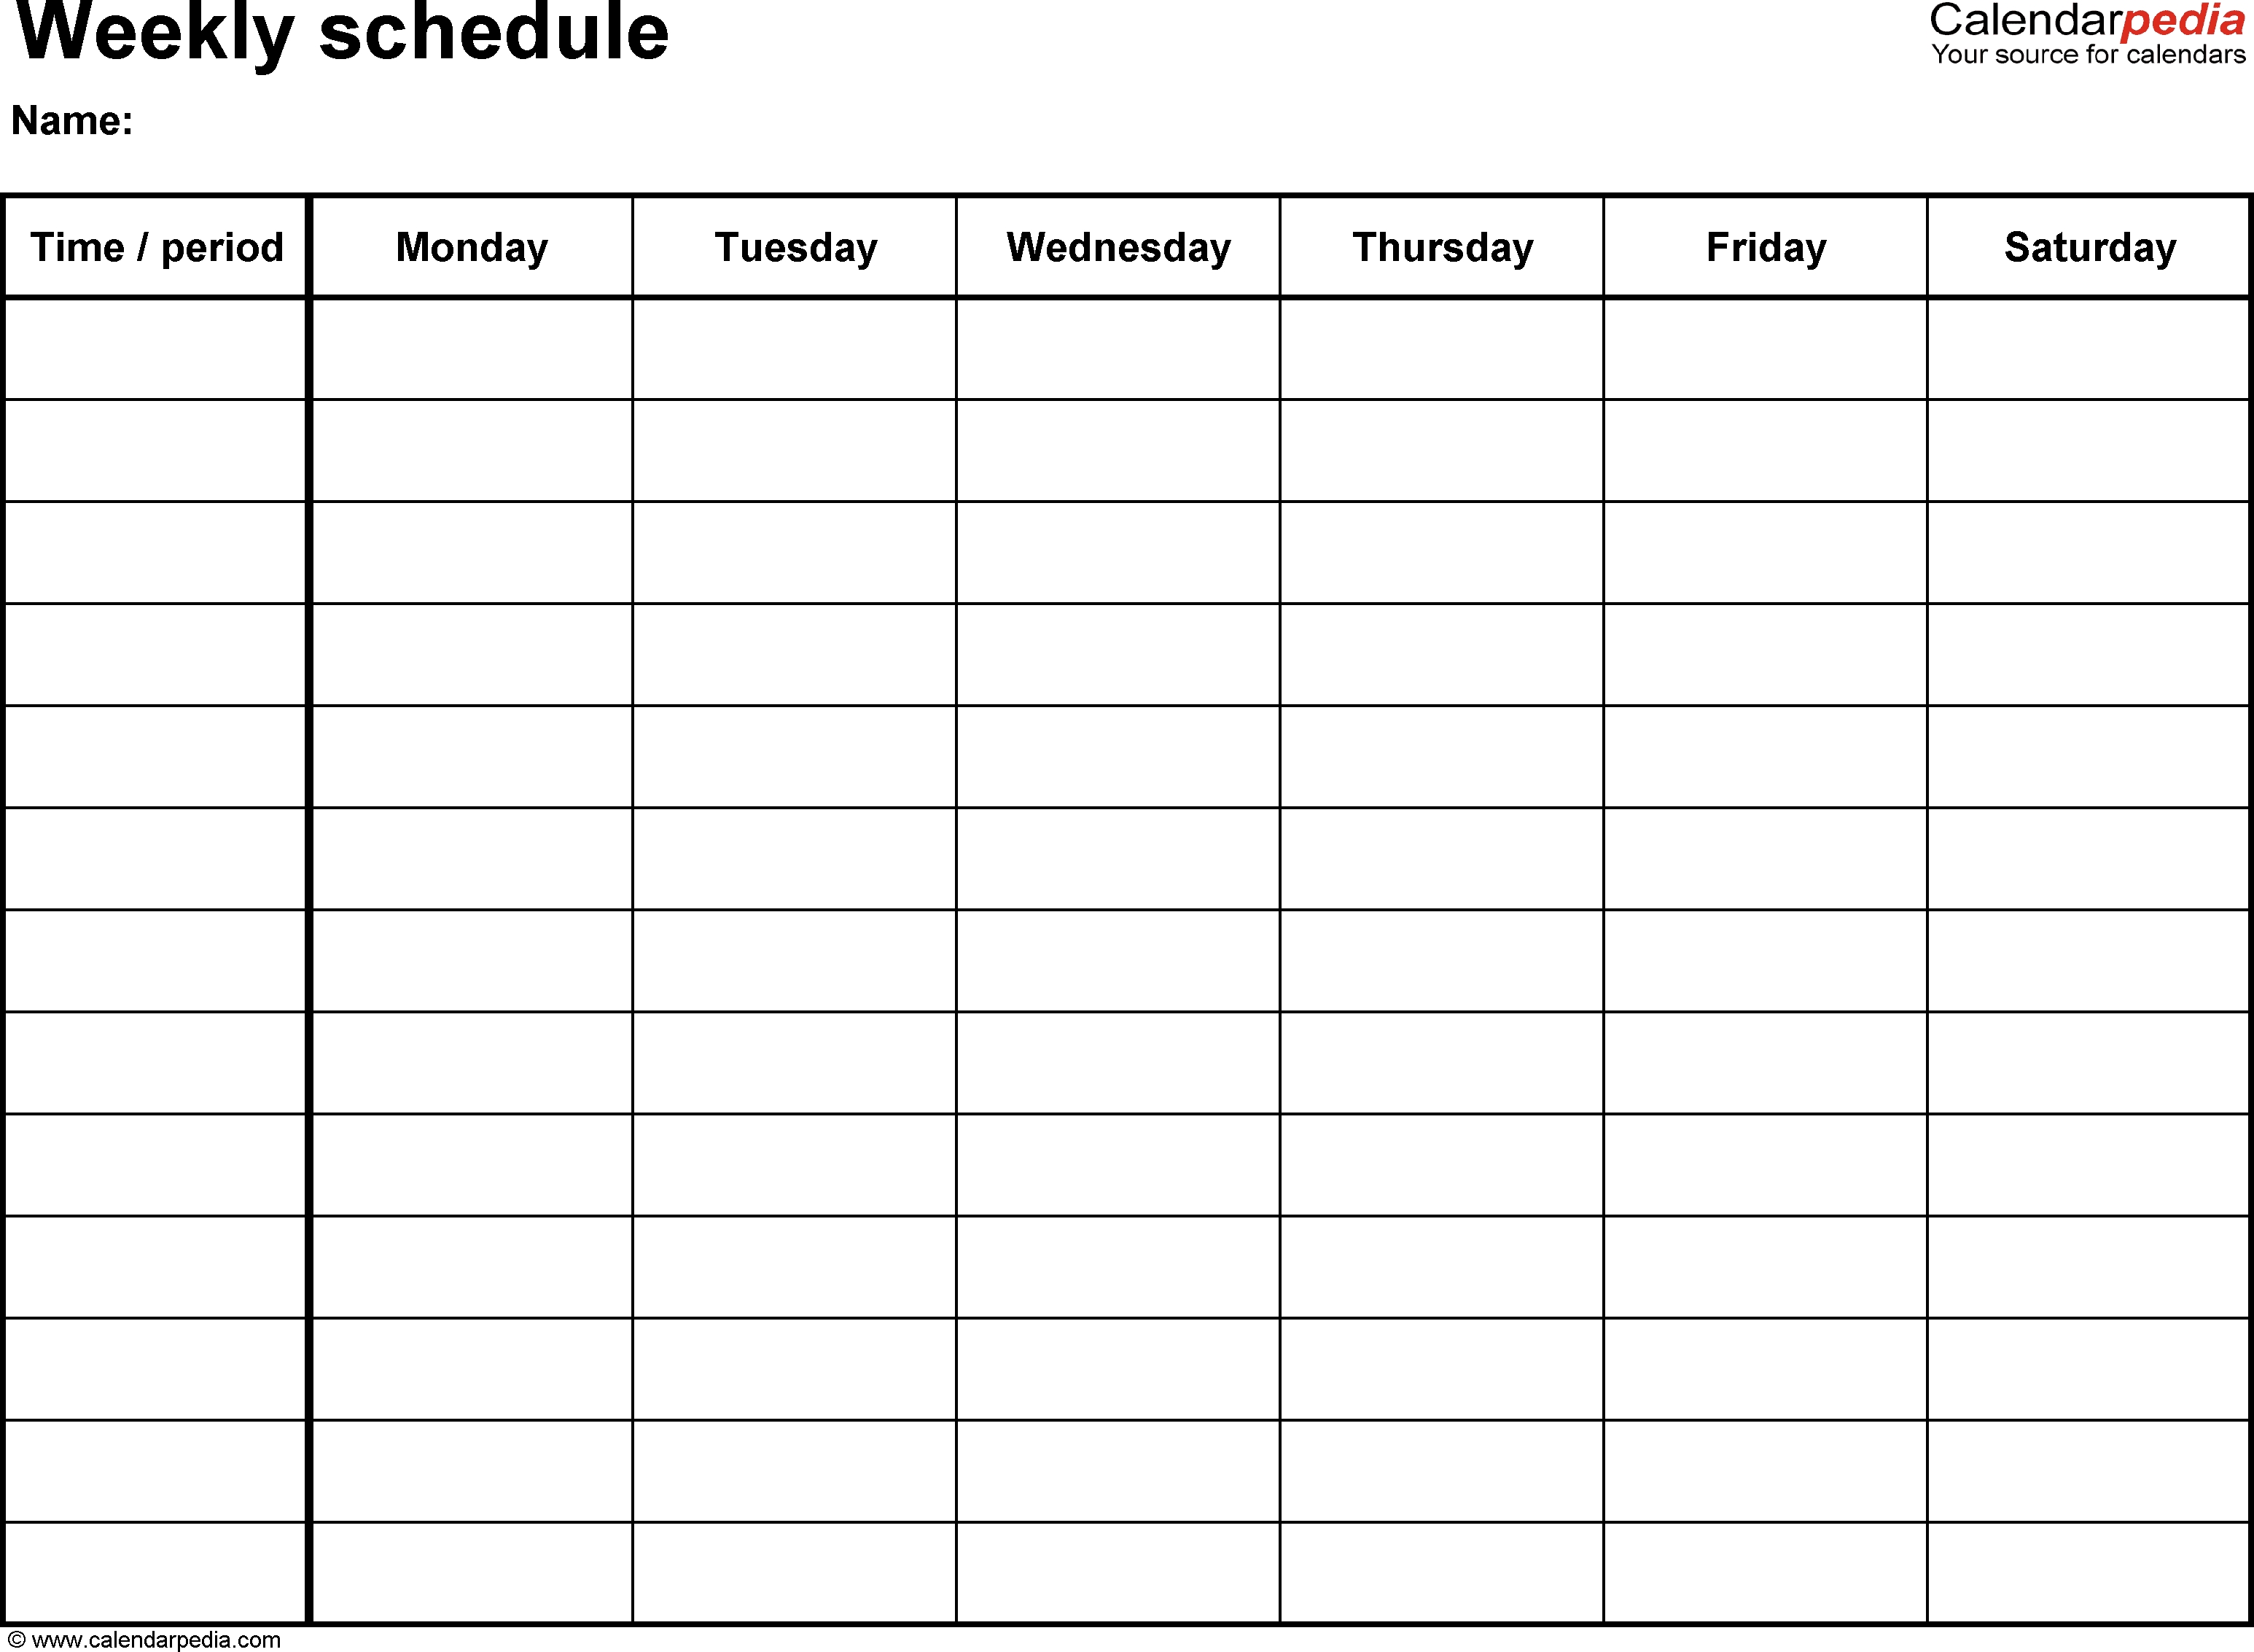 Free Weekly Schedule Templates For Word - 18 Templates  Free Blank Printable Weekly Calendar Template